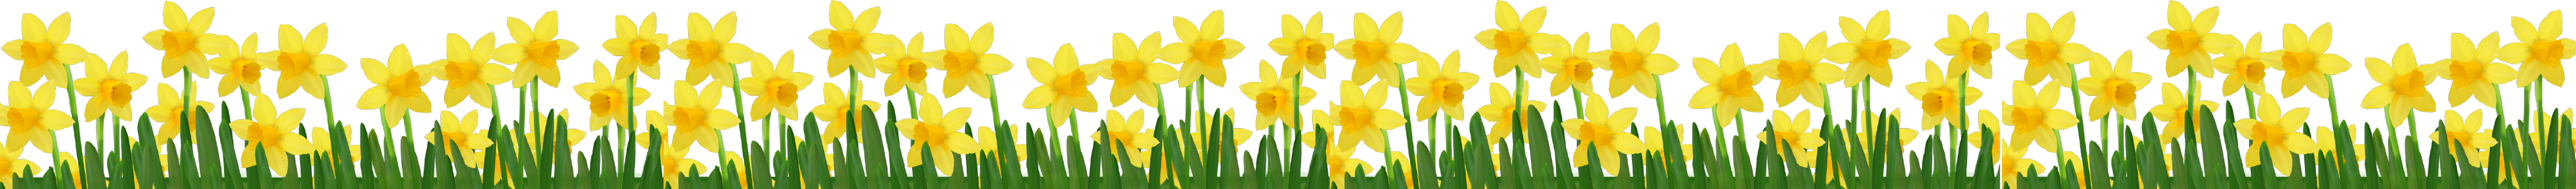 Daffodils as a symbol for Spring